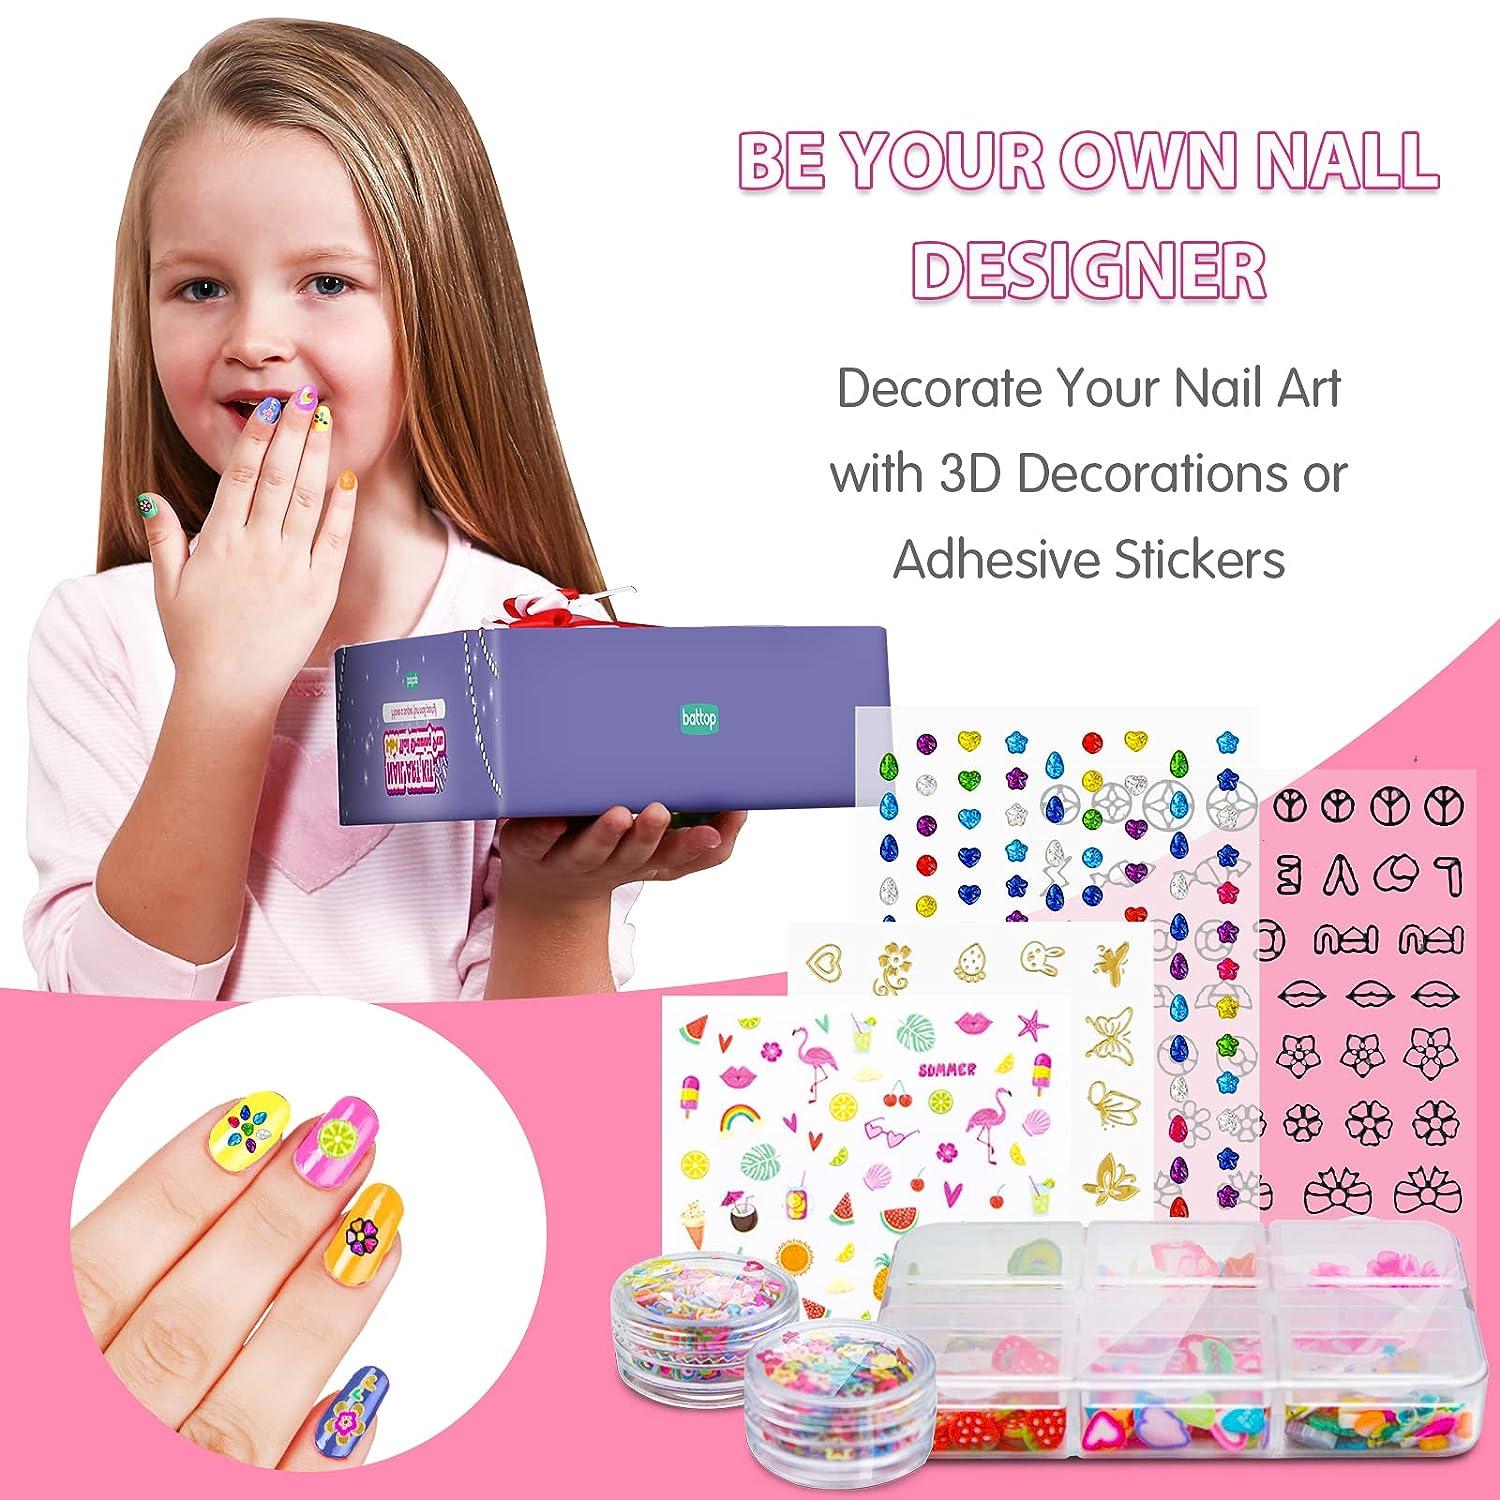 Kids Nail Polish Set for Girls - Nail Kit for Girls Ages 7-12 - Girls Gifts  Ideas - Nail Art Studio Girl stuff for Spa ,Makeup Manicures, Toys